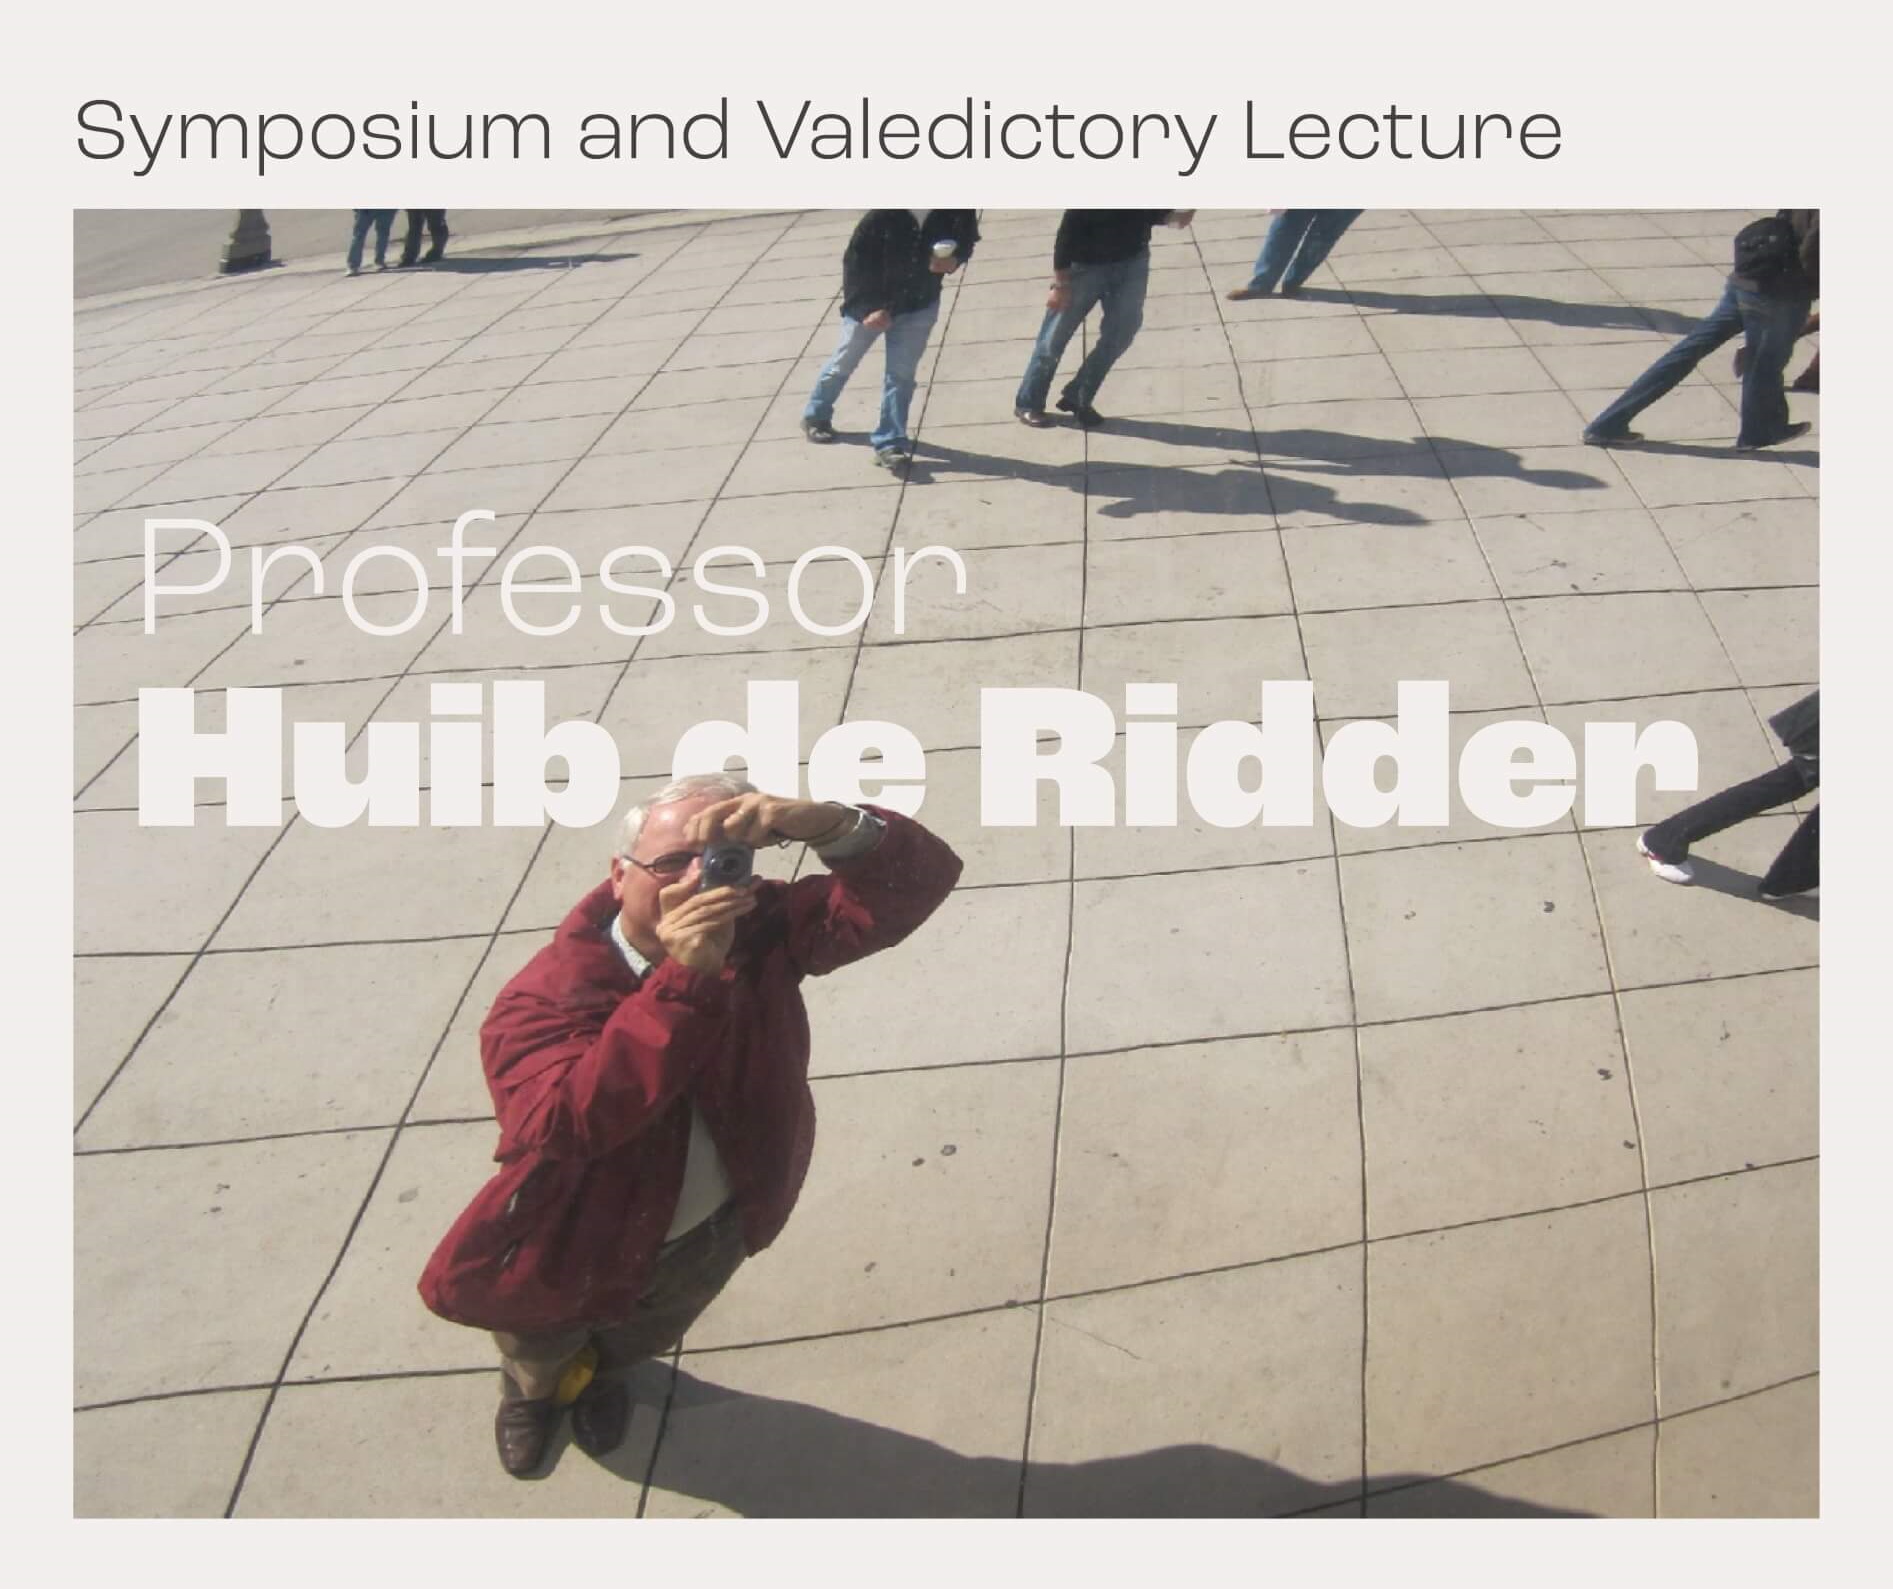 Symposium and valedictory lecture by Professor Huib de Ridder